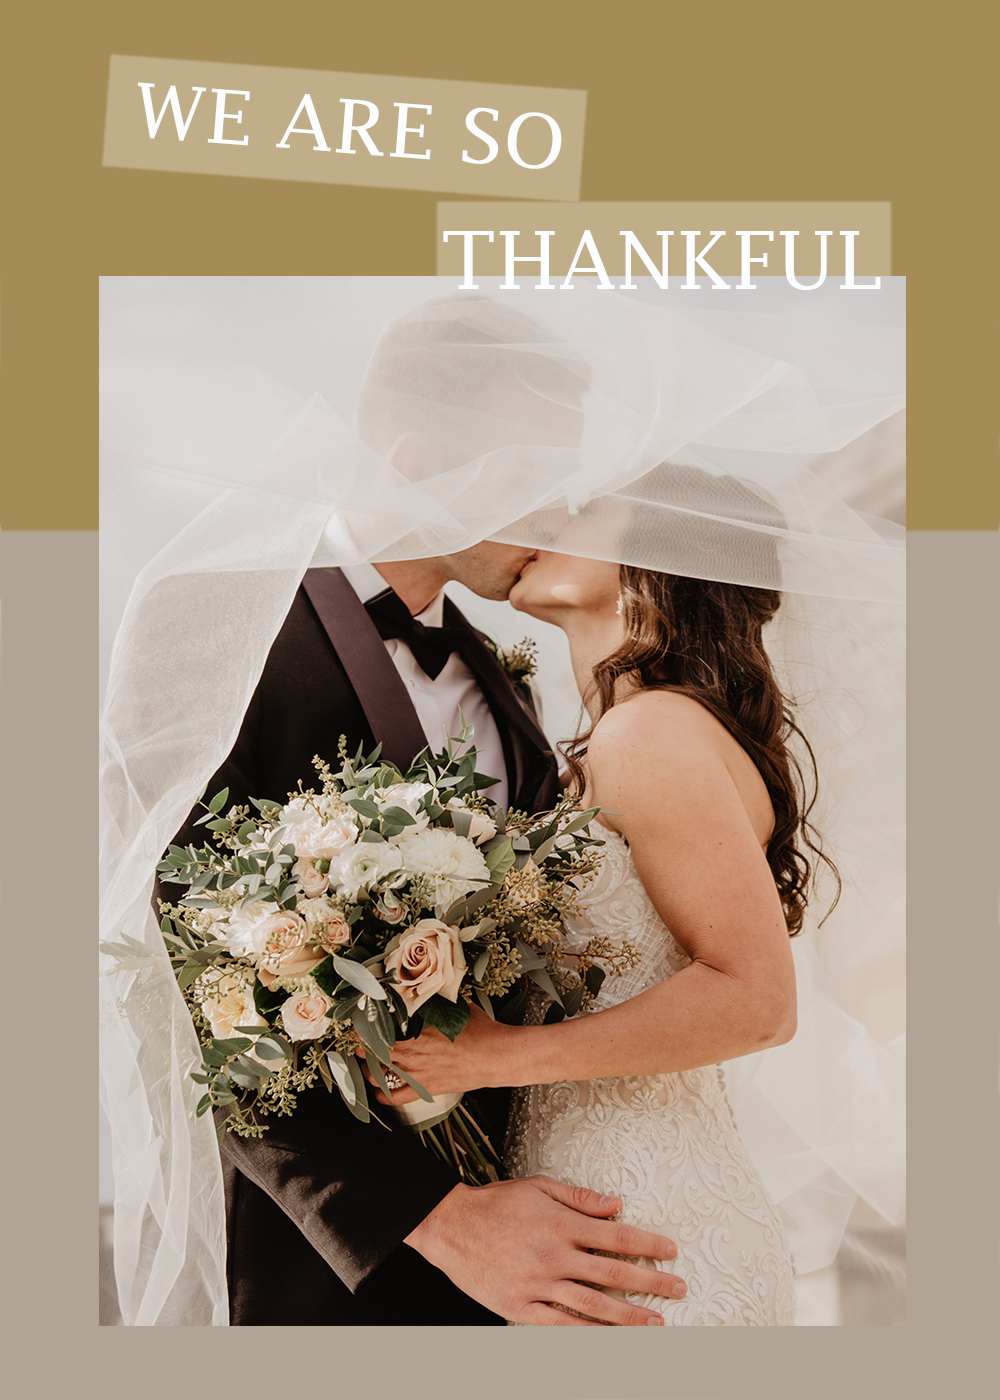 Couple kissing and message expressing gratitude